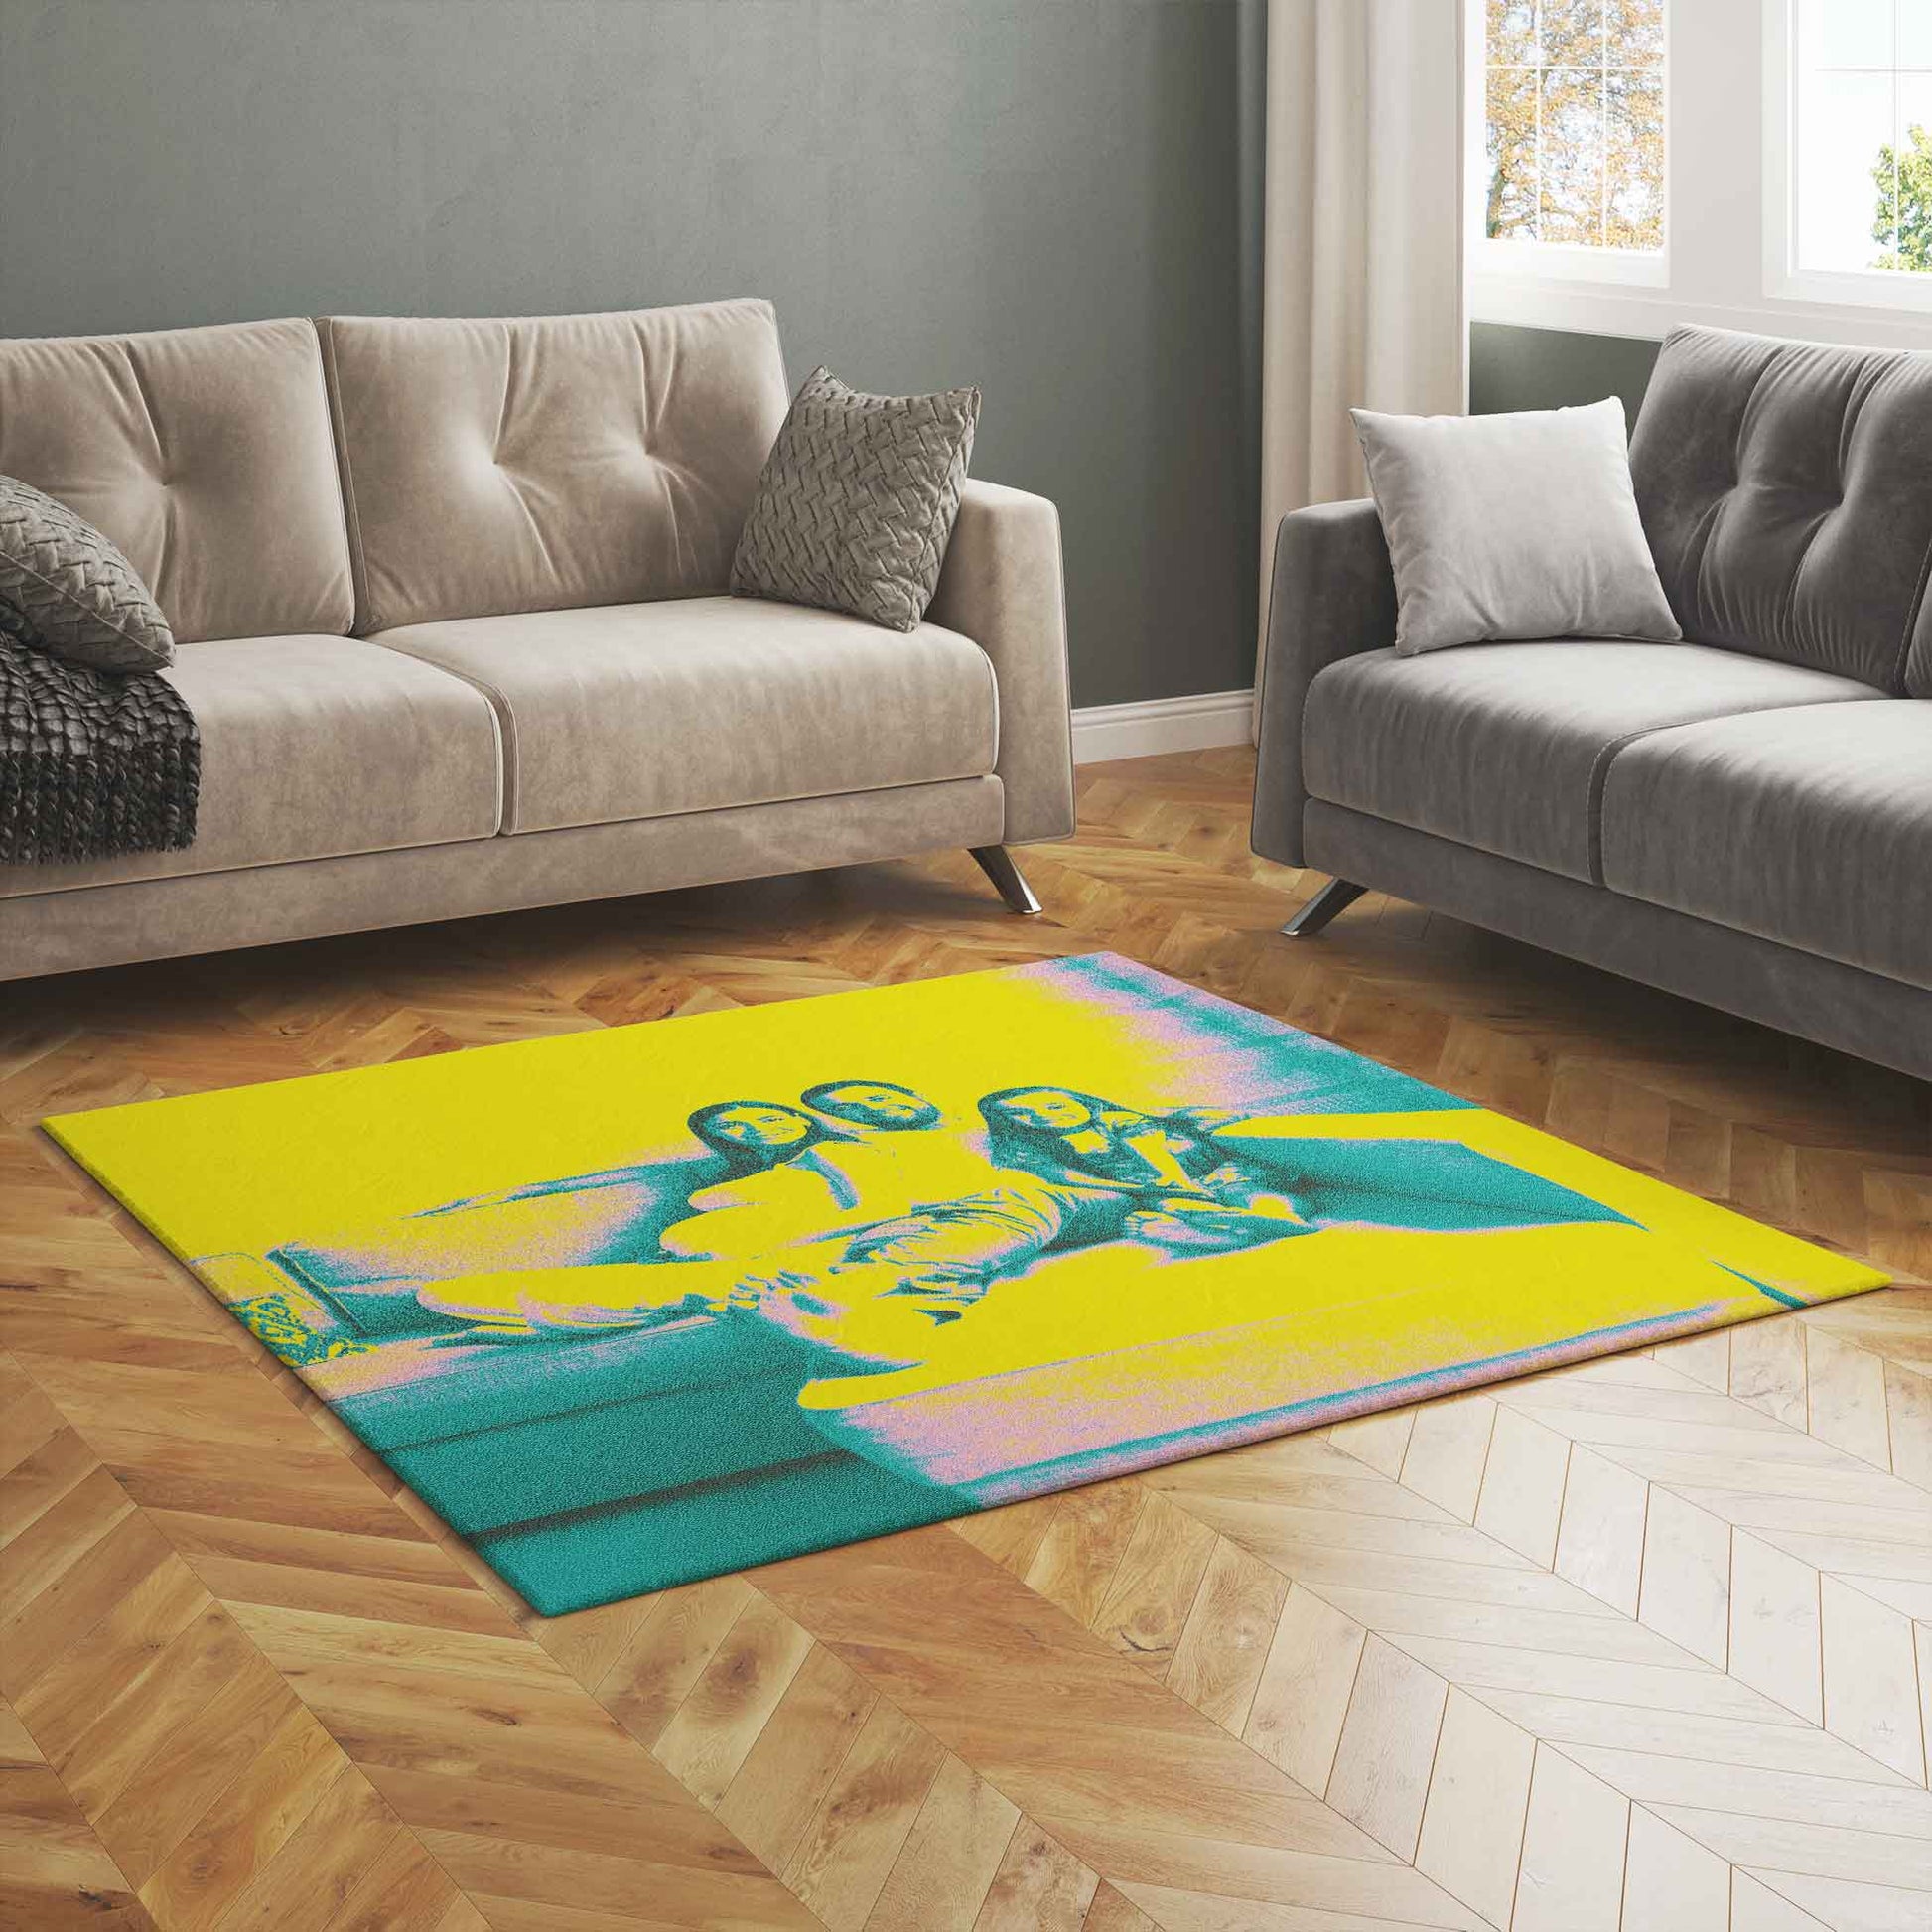 Make a bold statement with our Acid Yellow Photo Rug. Personalise it with your own image and bring a pop of excitement to your space